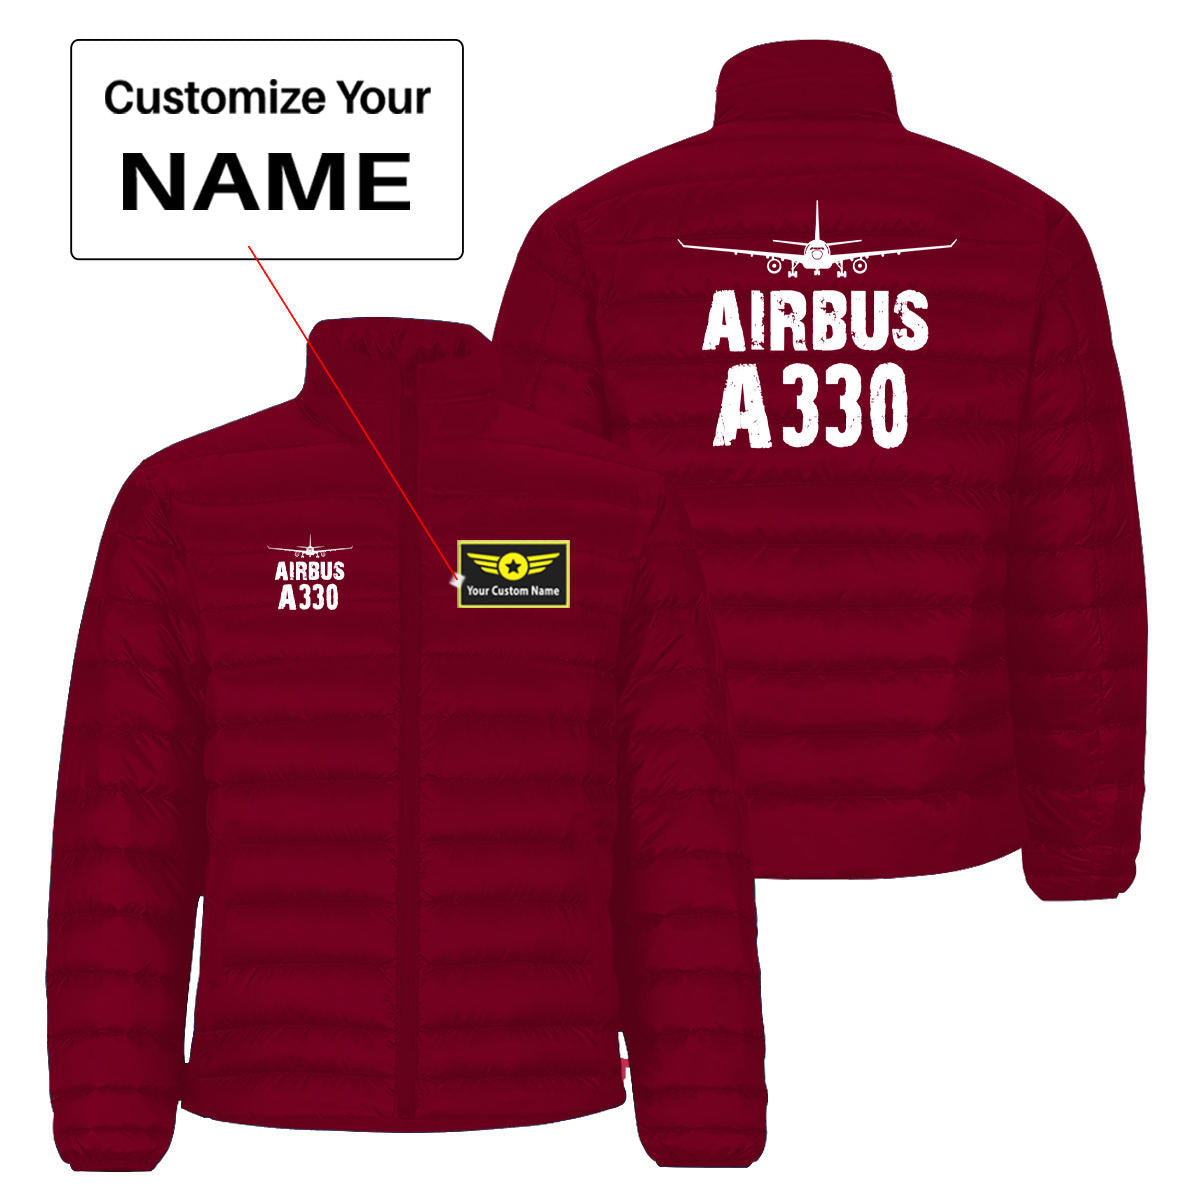 Airbus A330 & Plane Designed Padded Jackets